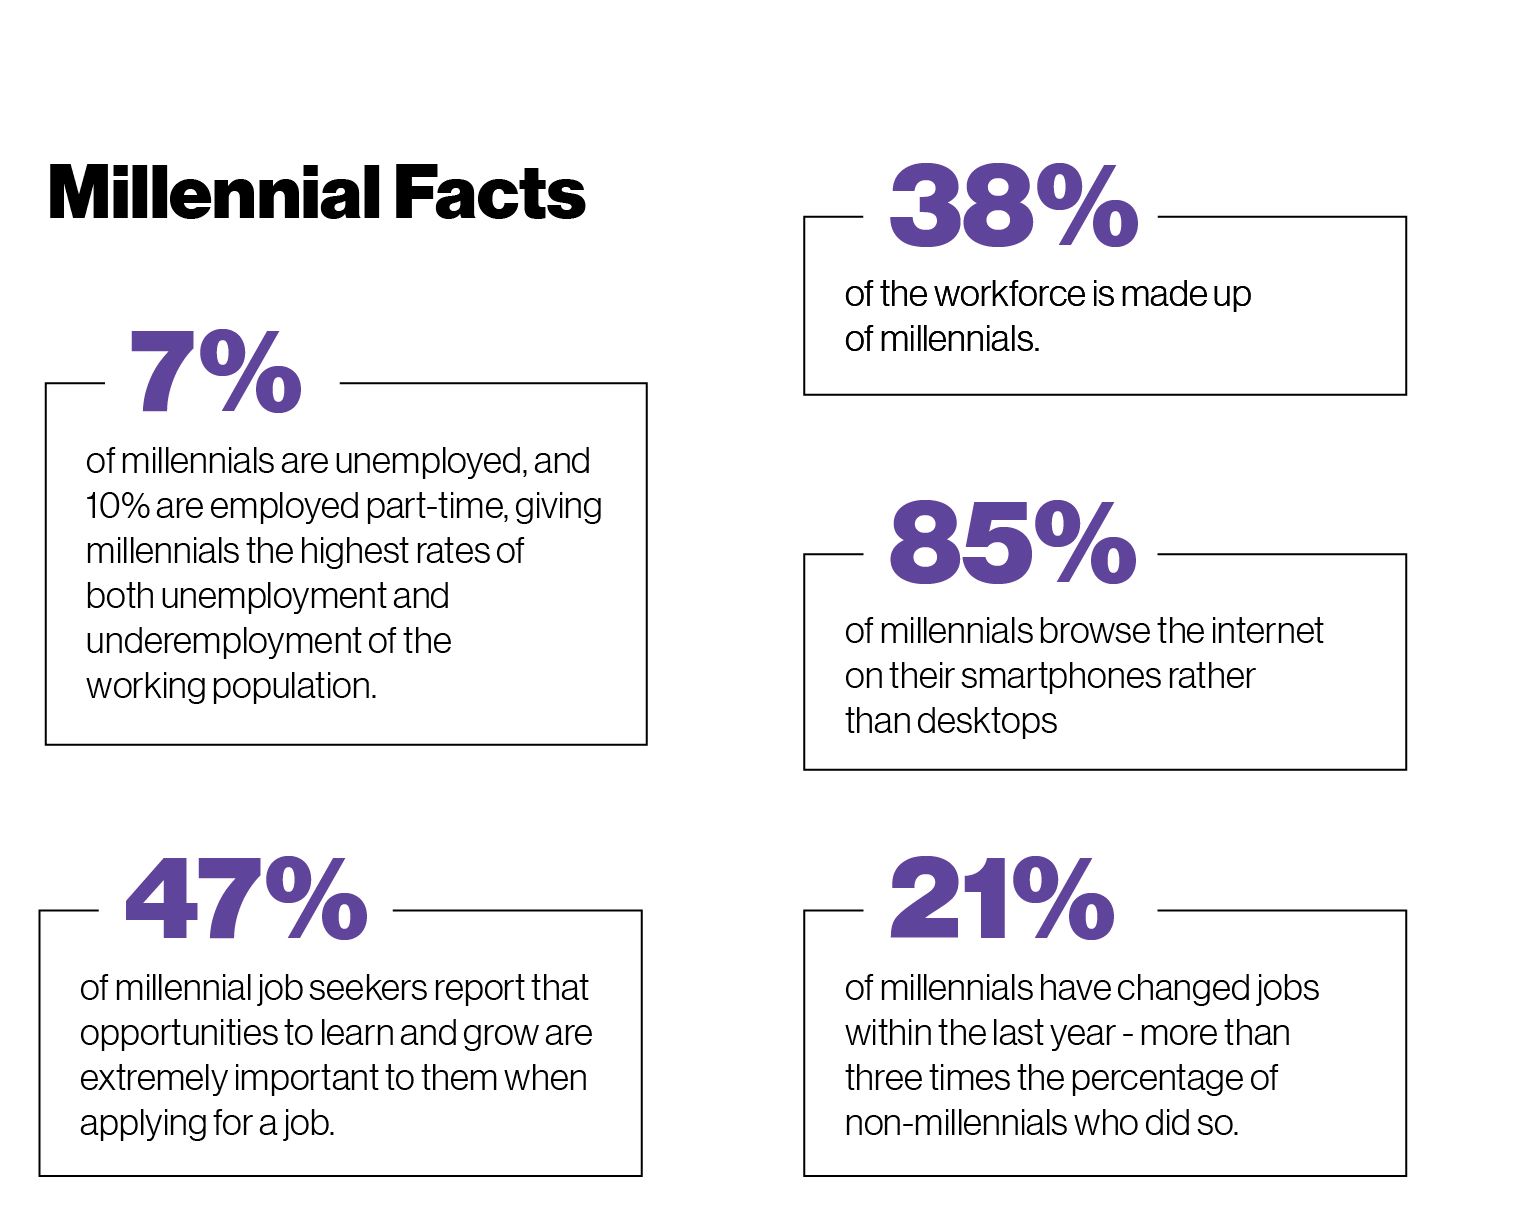 Some facts about Millennials: 38% of the workforce is made up of millennials; 85% of millennials browse the internet on their smartphones rather than desktops; 21% of millennials have changed jobs in the past year — more than three times the percentage of non-millennials who did so; 47% of millennial job seekers report that opportunities to learn and grow are extremely important to them when applying for a job; 7% of millennials are unemployed, and 10% are employed part-time, giving millennials the highest rates of both unemployment and underemployment of the working population.